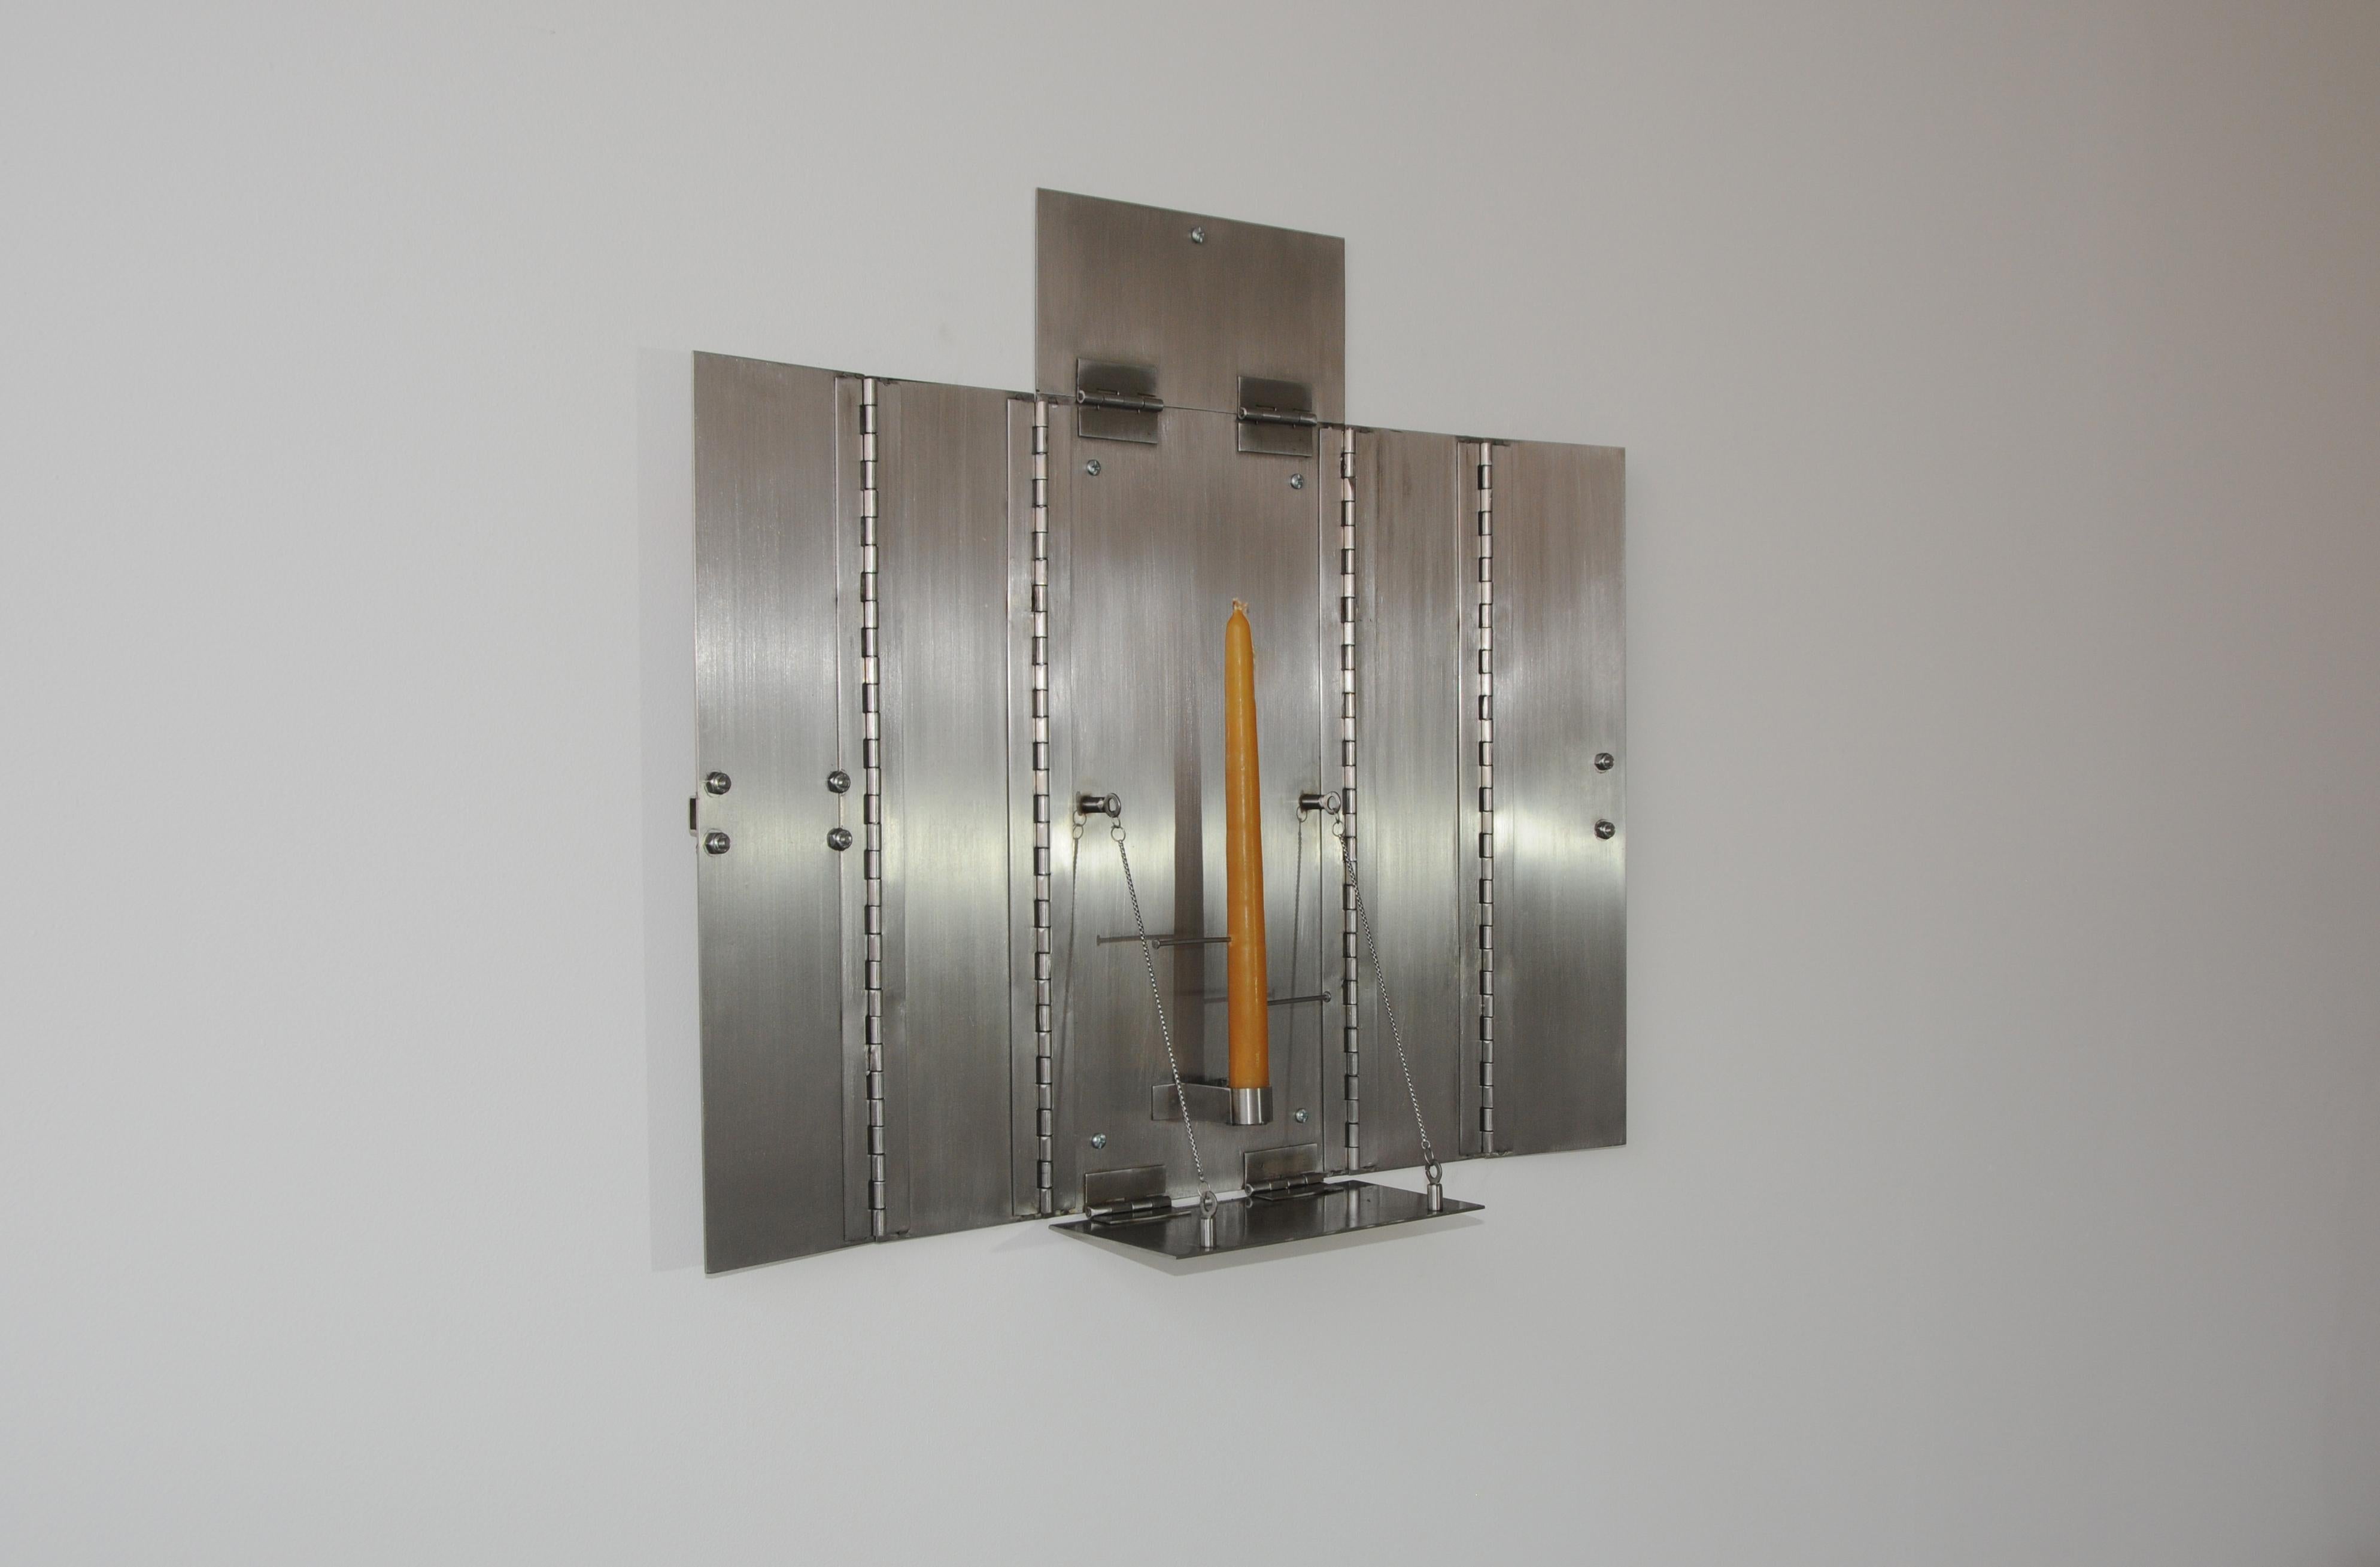 A candle holder rendered in stainless steel is mounted onto the wall as an altar panel painting that folds closed to simulate a medical cabinet. The candle supported by the metal structure is pierced by nails at different heights marking time